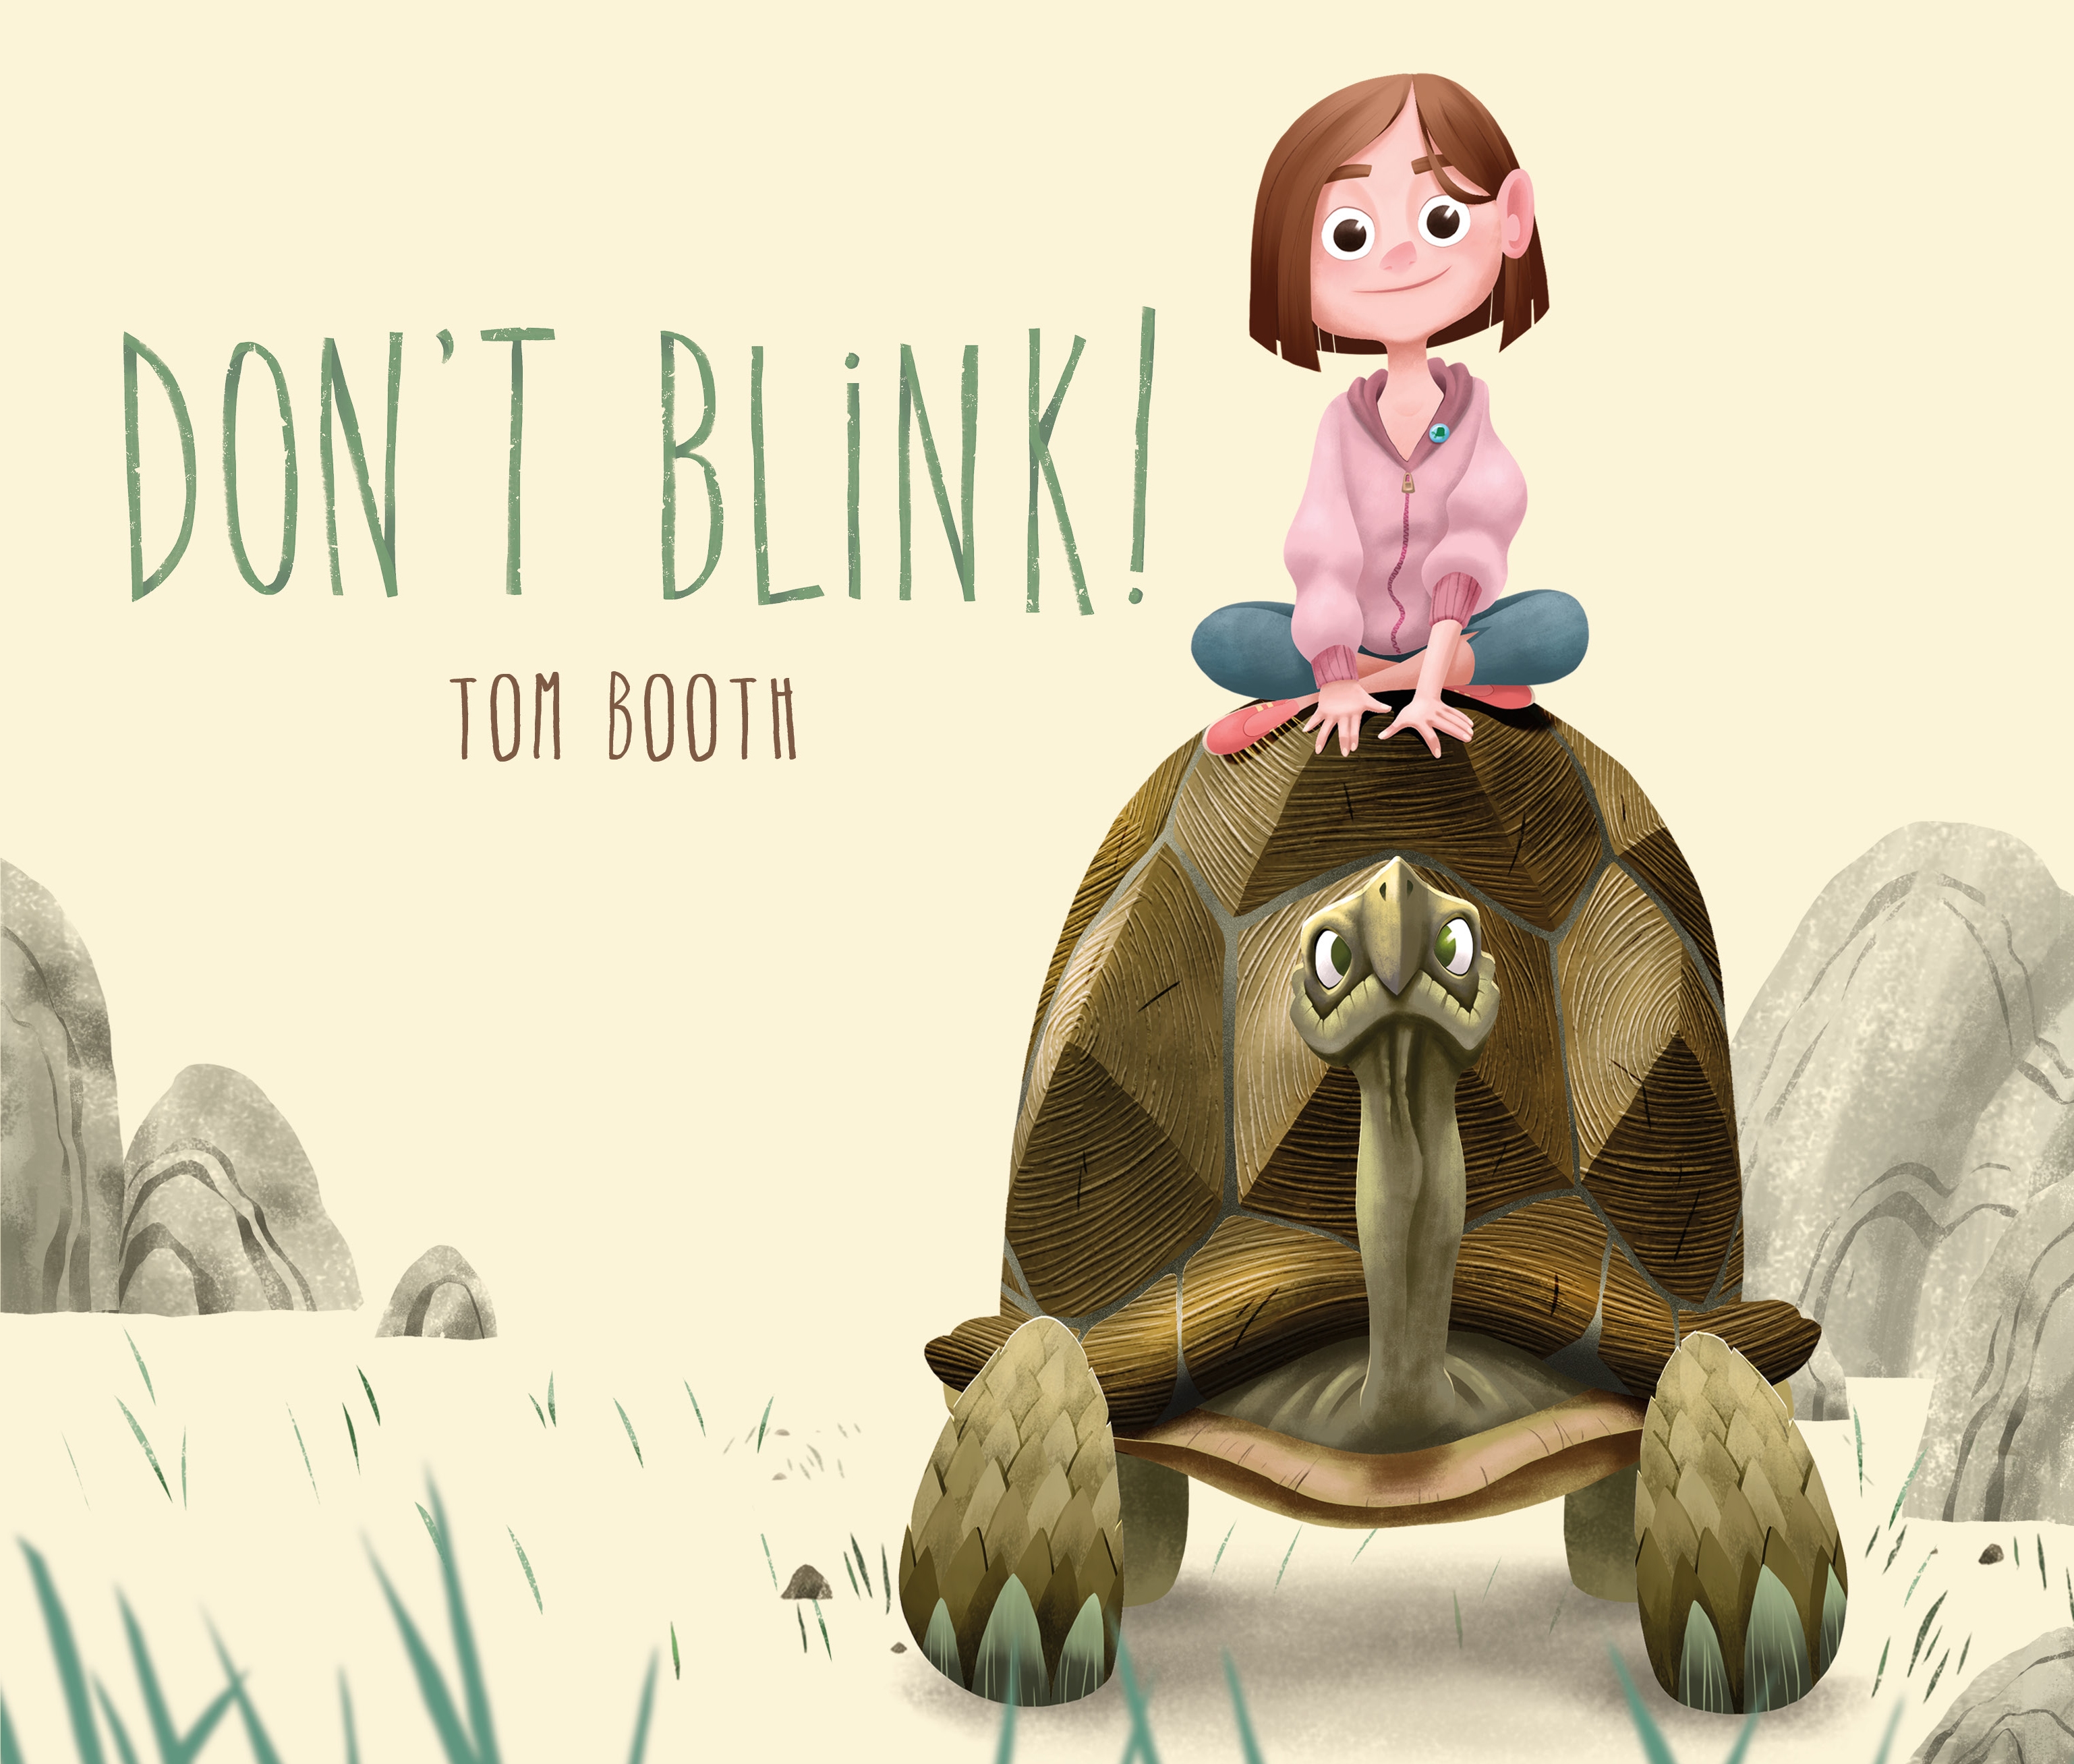 Sunday Story Time with Tom Booth (Author & Illustrator of Don't Blink!)